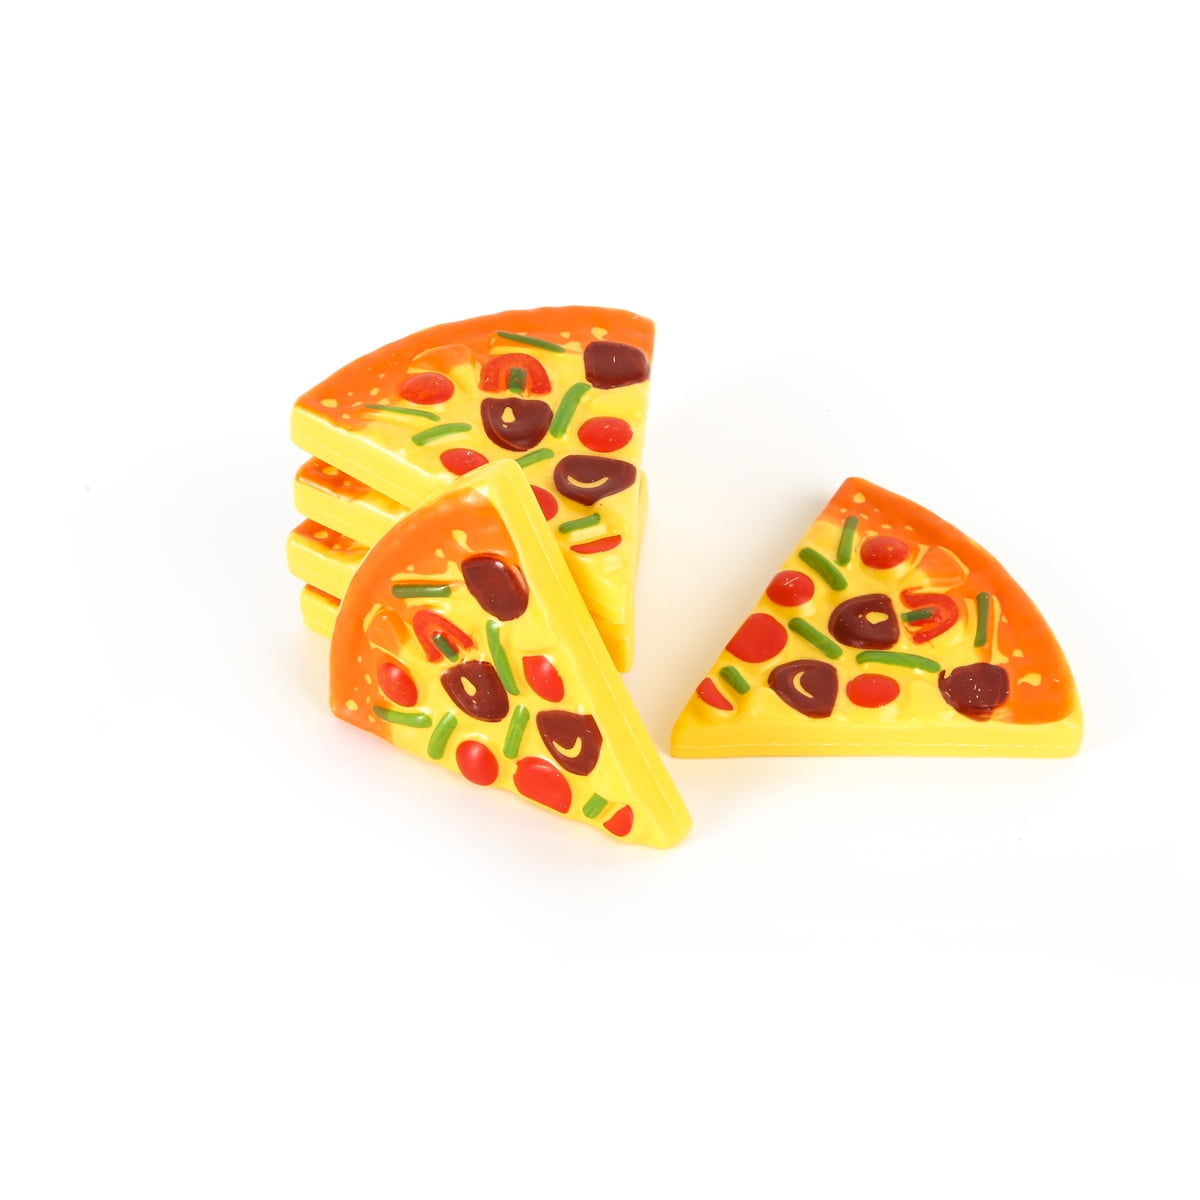 Details about   Xmas Kids Toy Pretend Role Play Kitchen Pizza Food Cutting Sets Children Gift . 